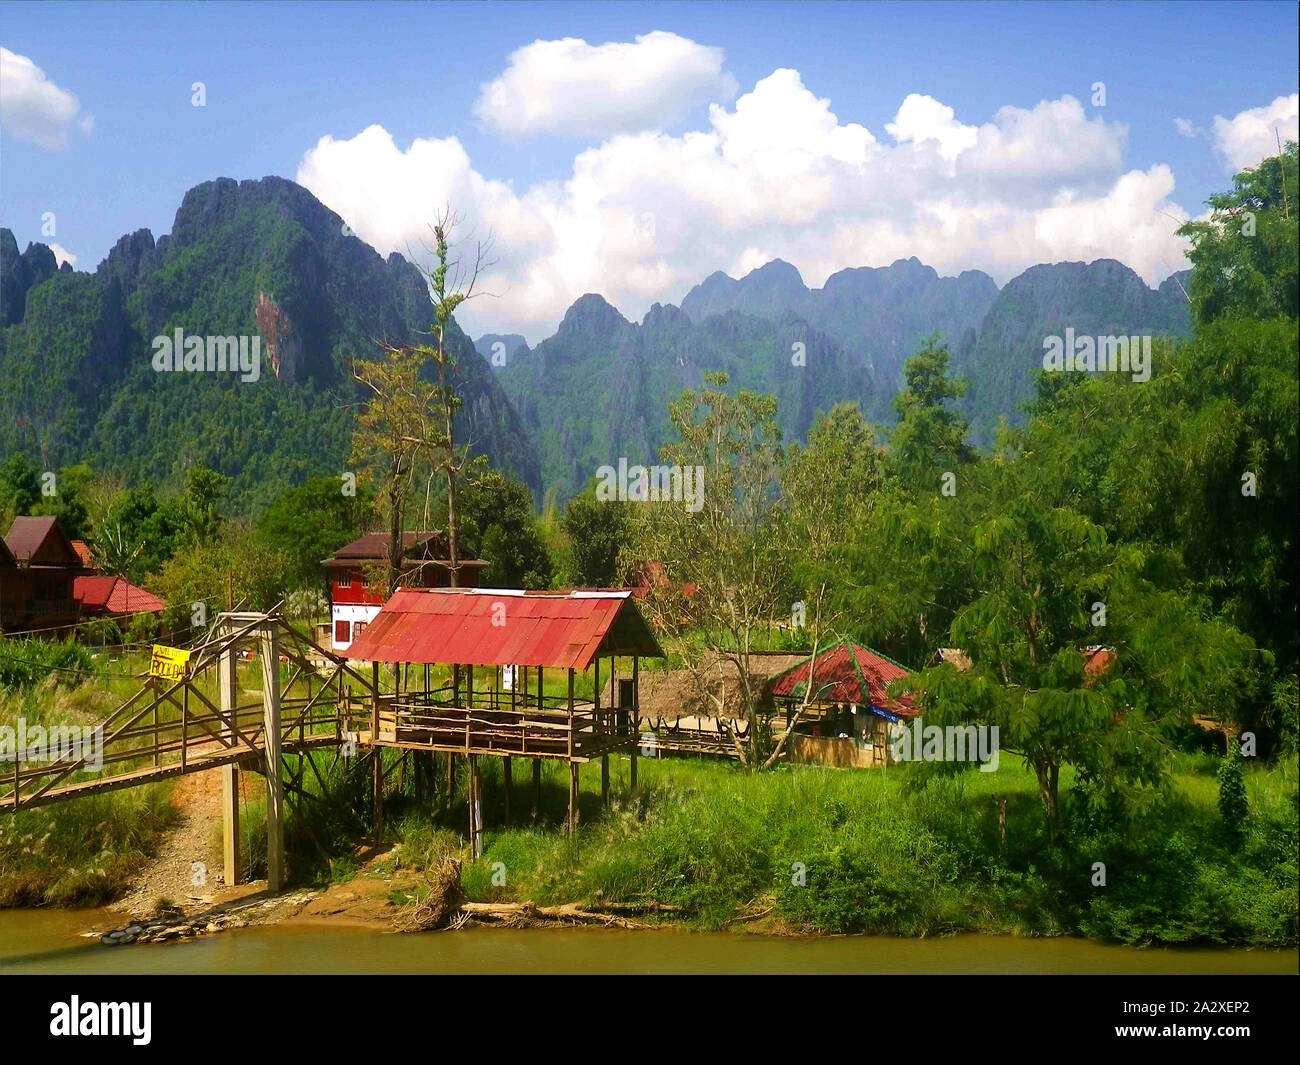 Village in Laos, Small Village Community, Houses Mostly Three-Storey, Houses Covered with Grass Mats or Corrugated Iron, Wooden Bridge over the River Stock Photo